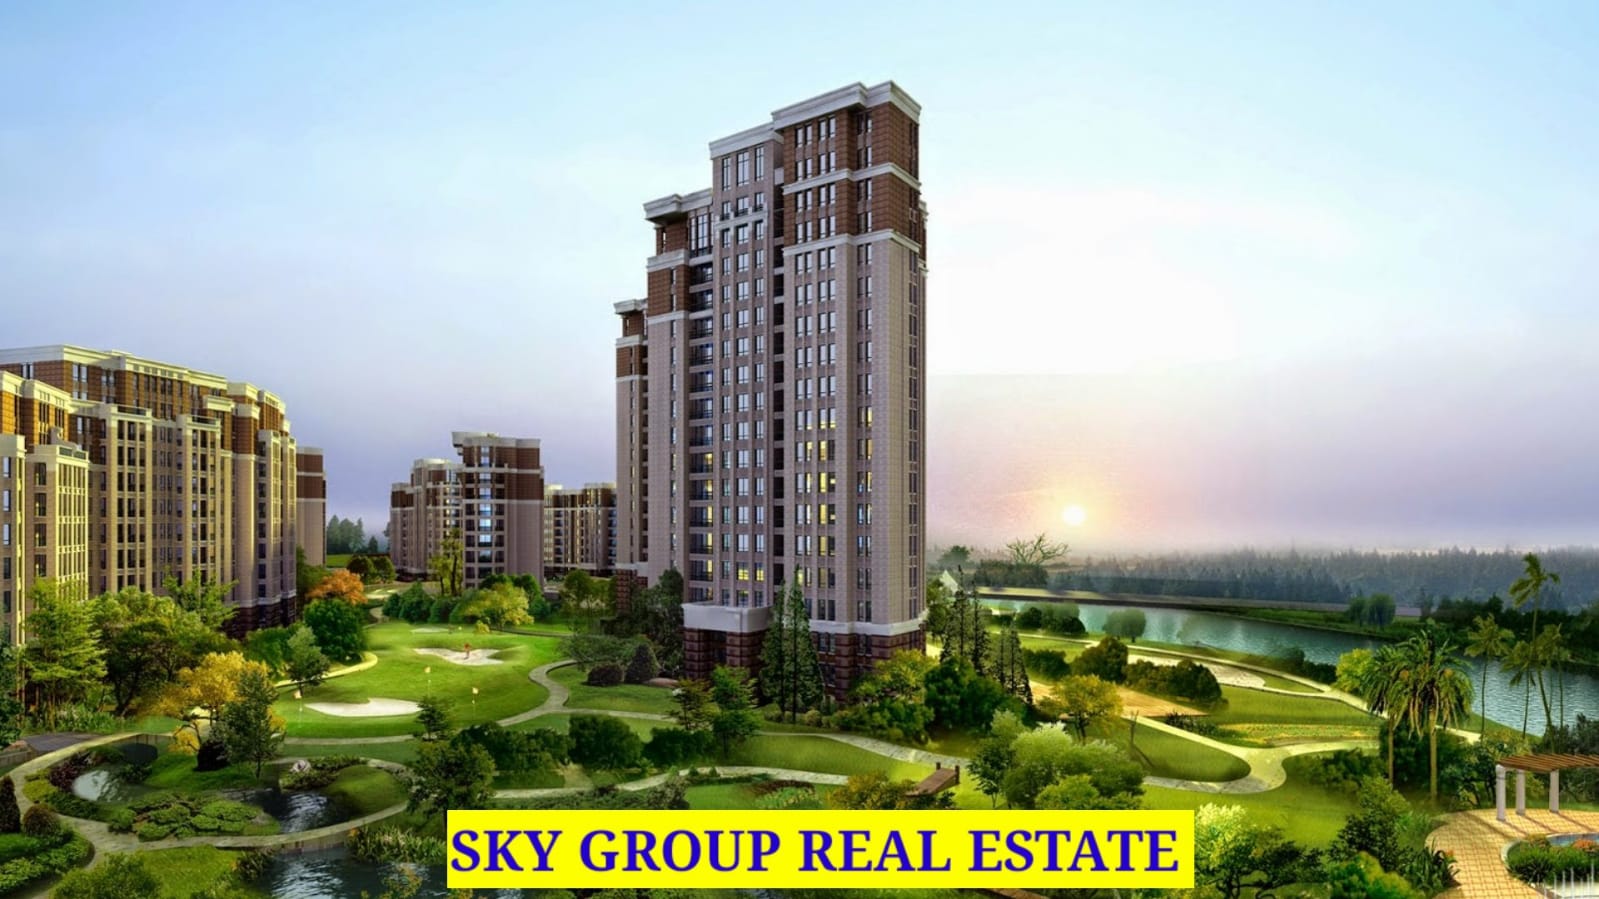 Sky Group Real Estate